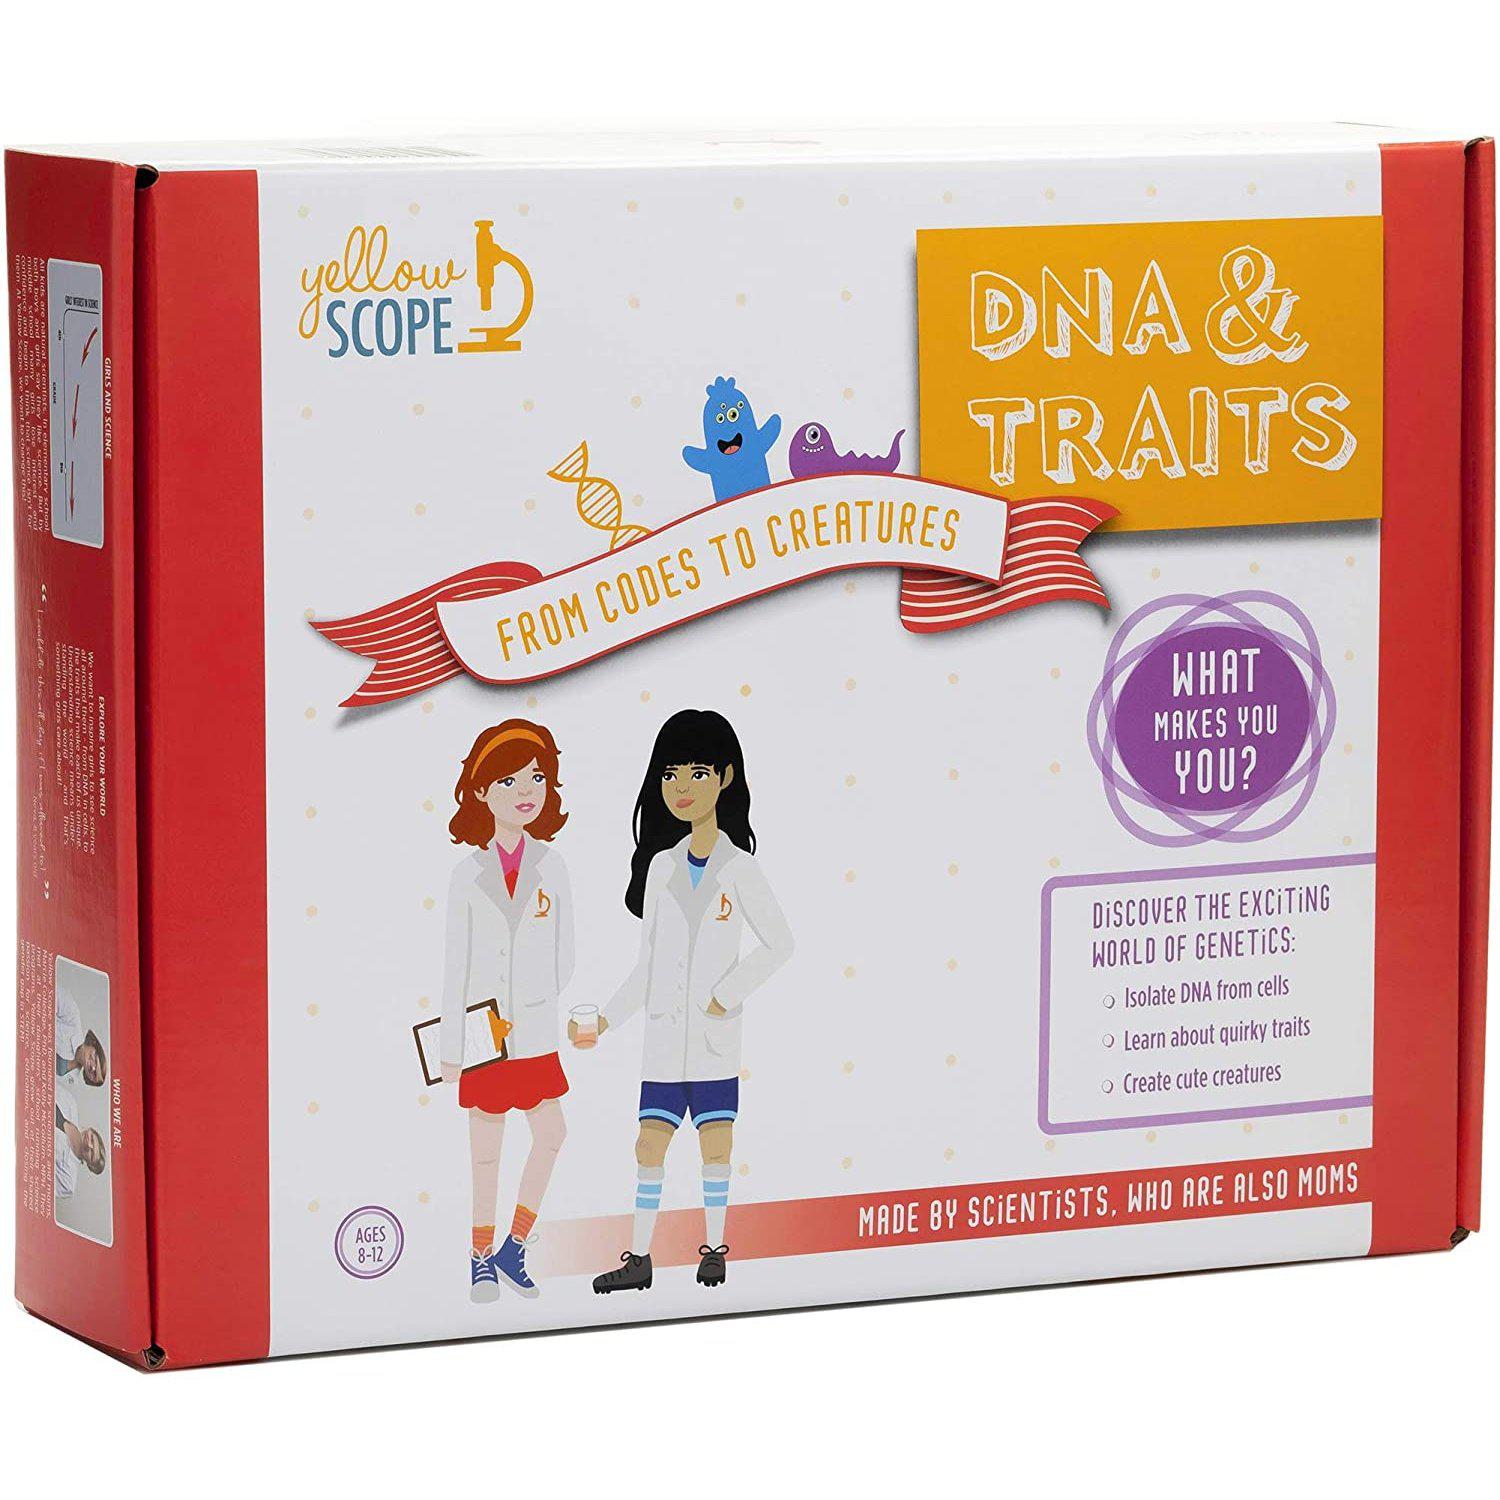 DNA & Traits: From Codes to Creatures-Science & Discovery-Yellow Scope-Yellow Springs Toy Company